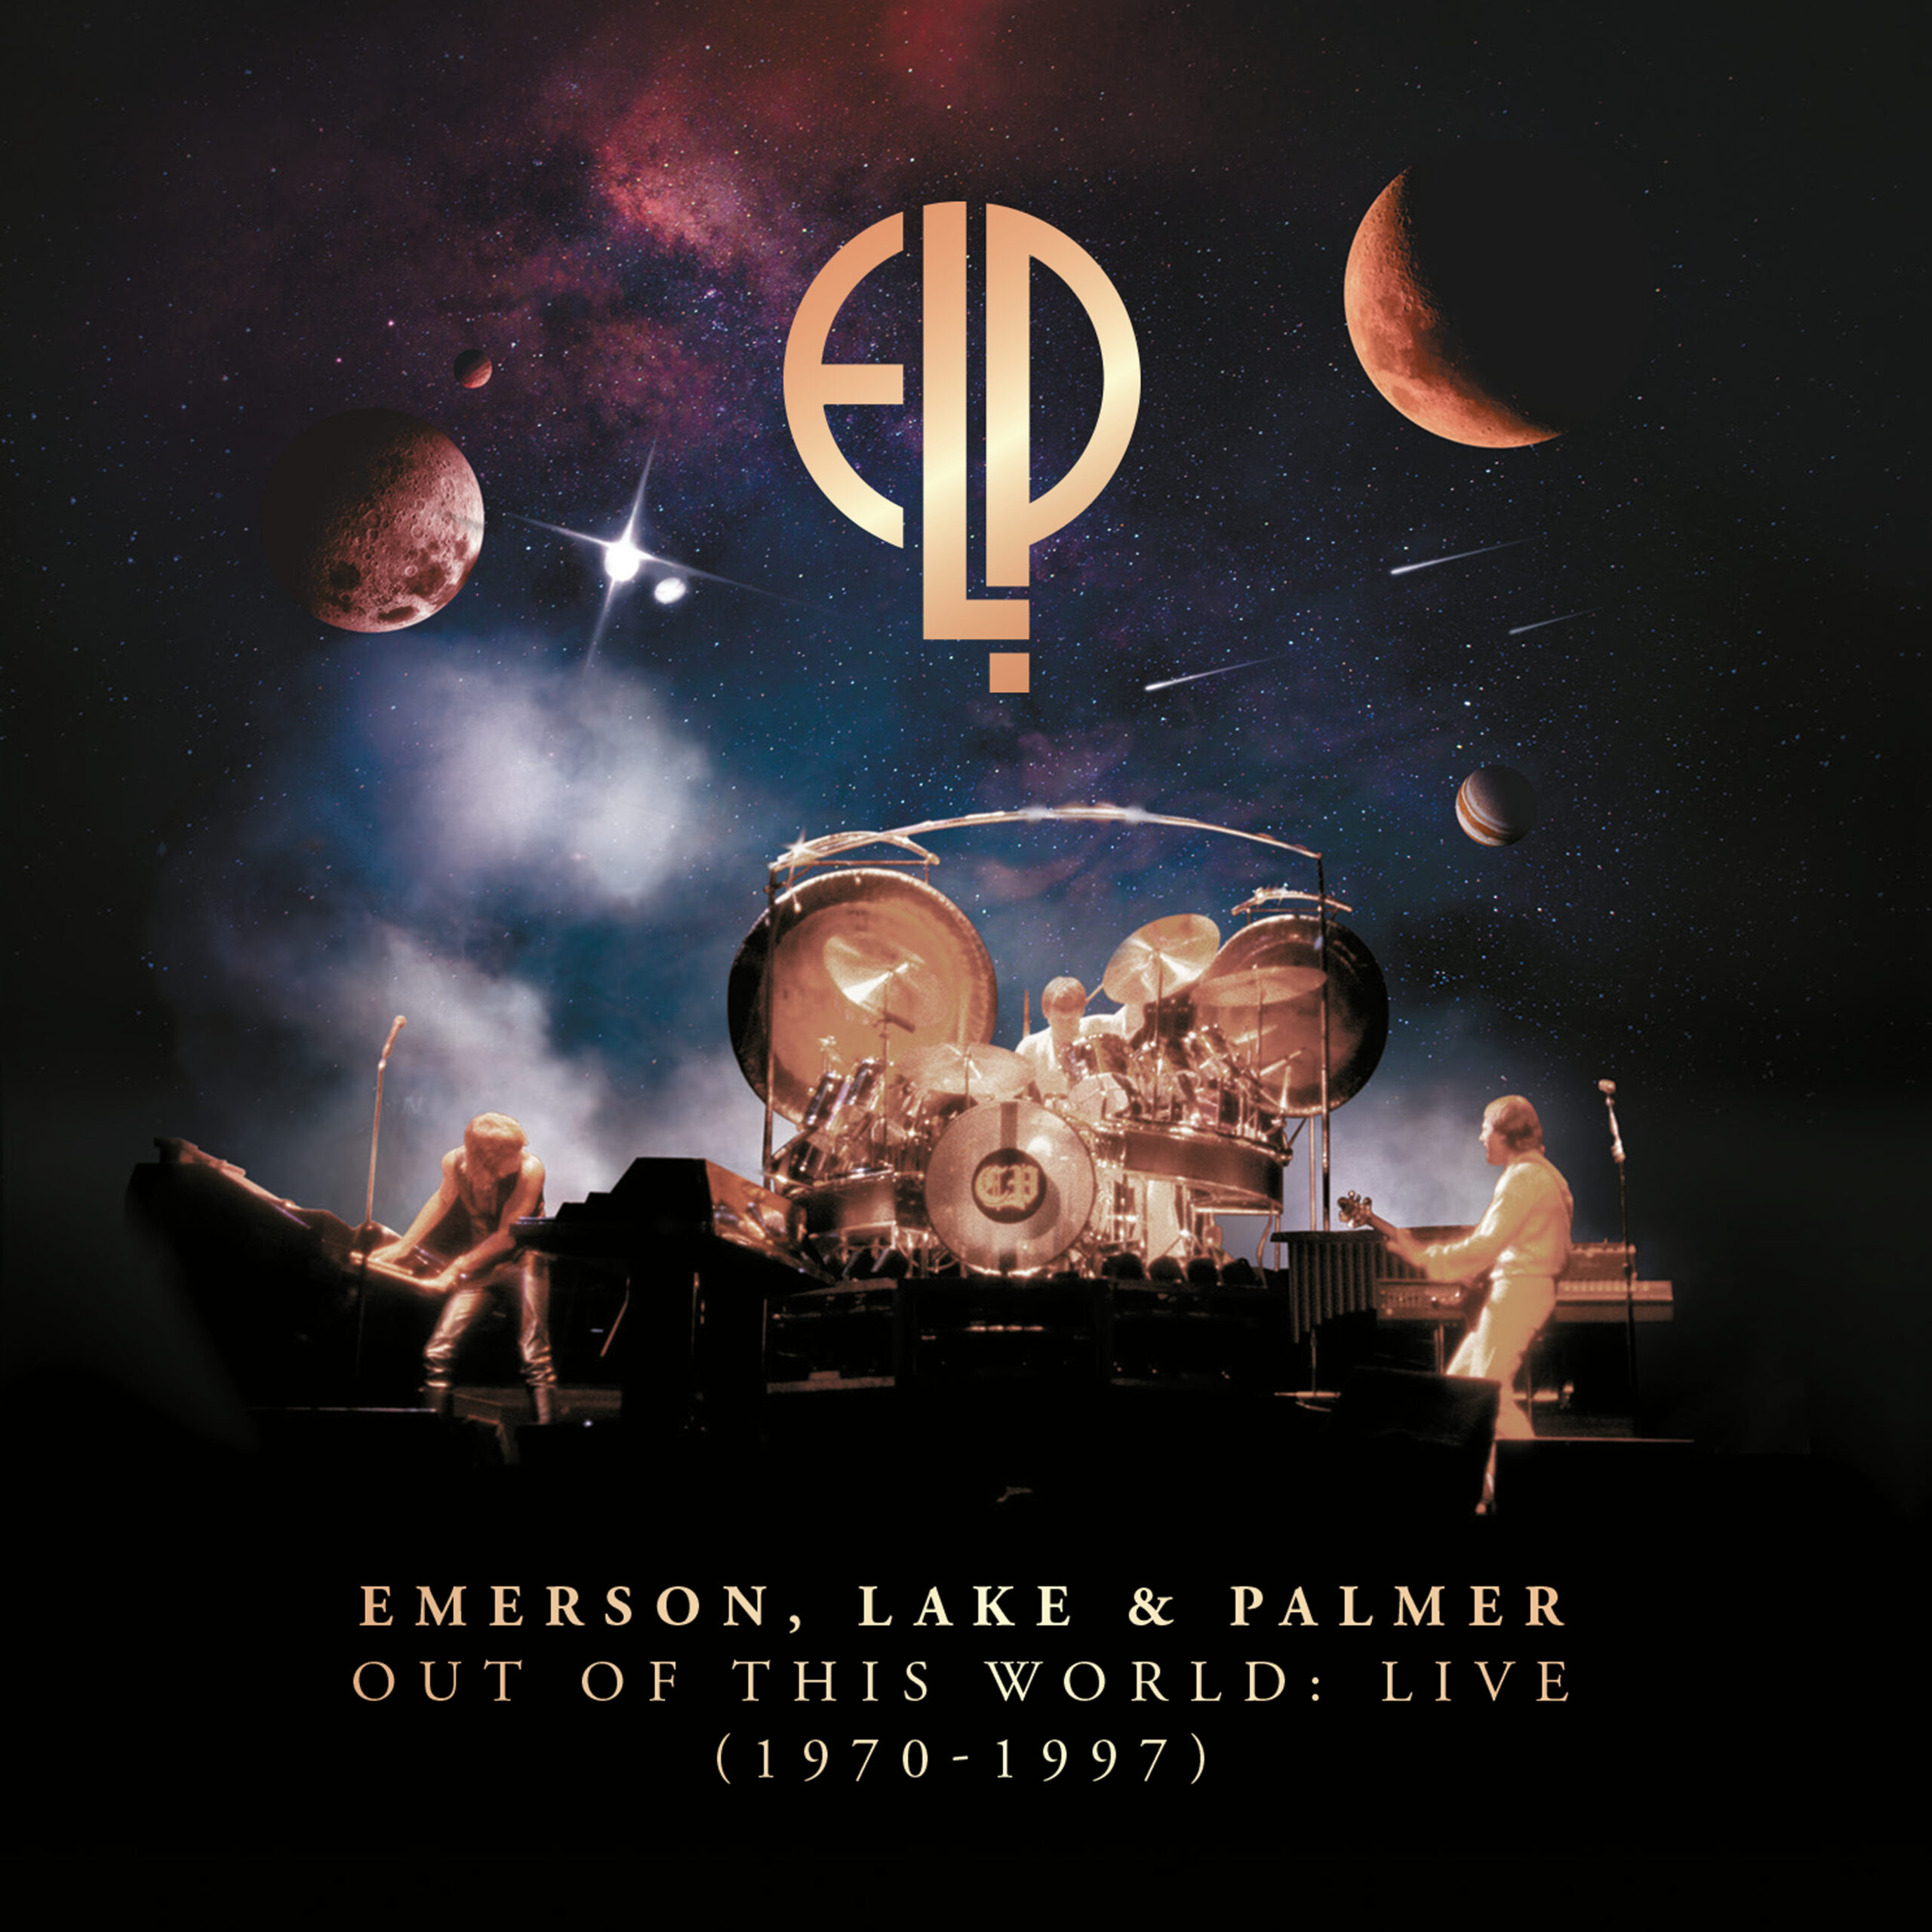 ELP Celebrate Live Career With 7CD and 10LP Box Sets, Out Of This